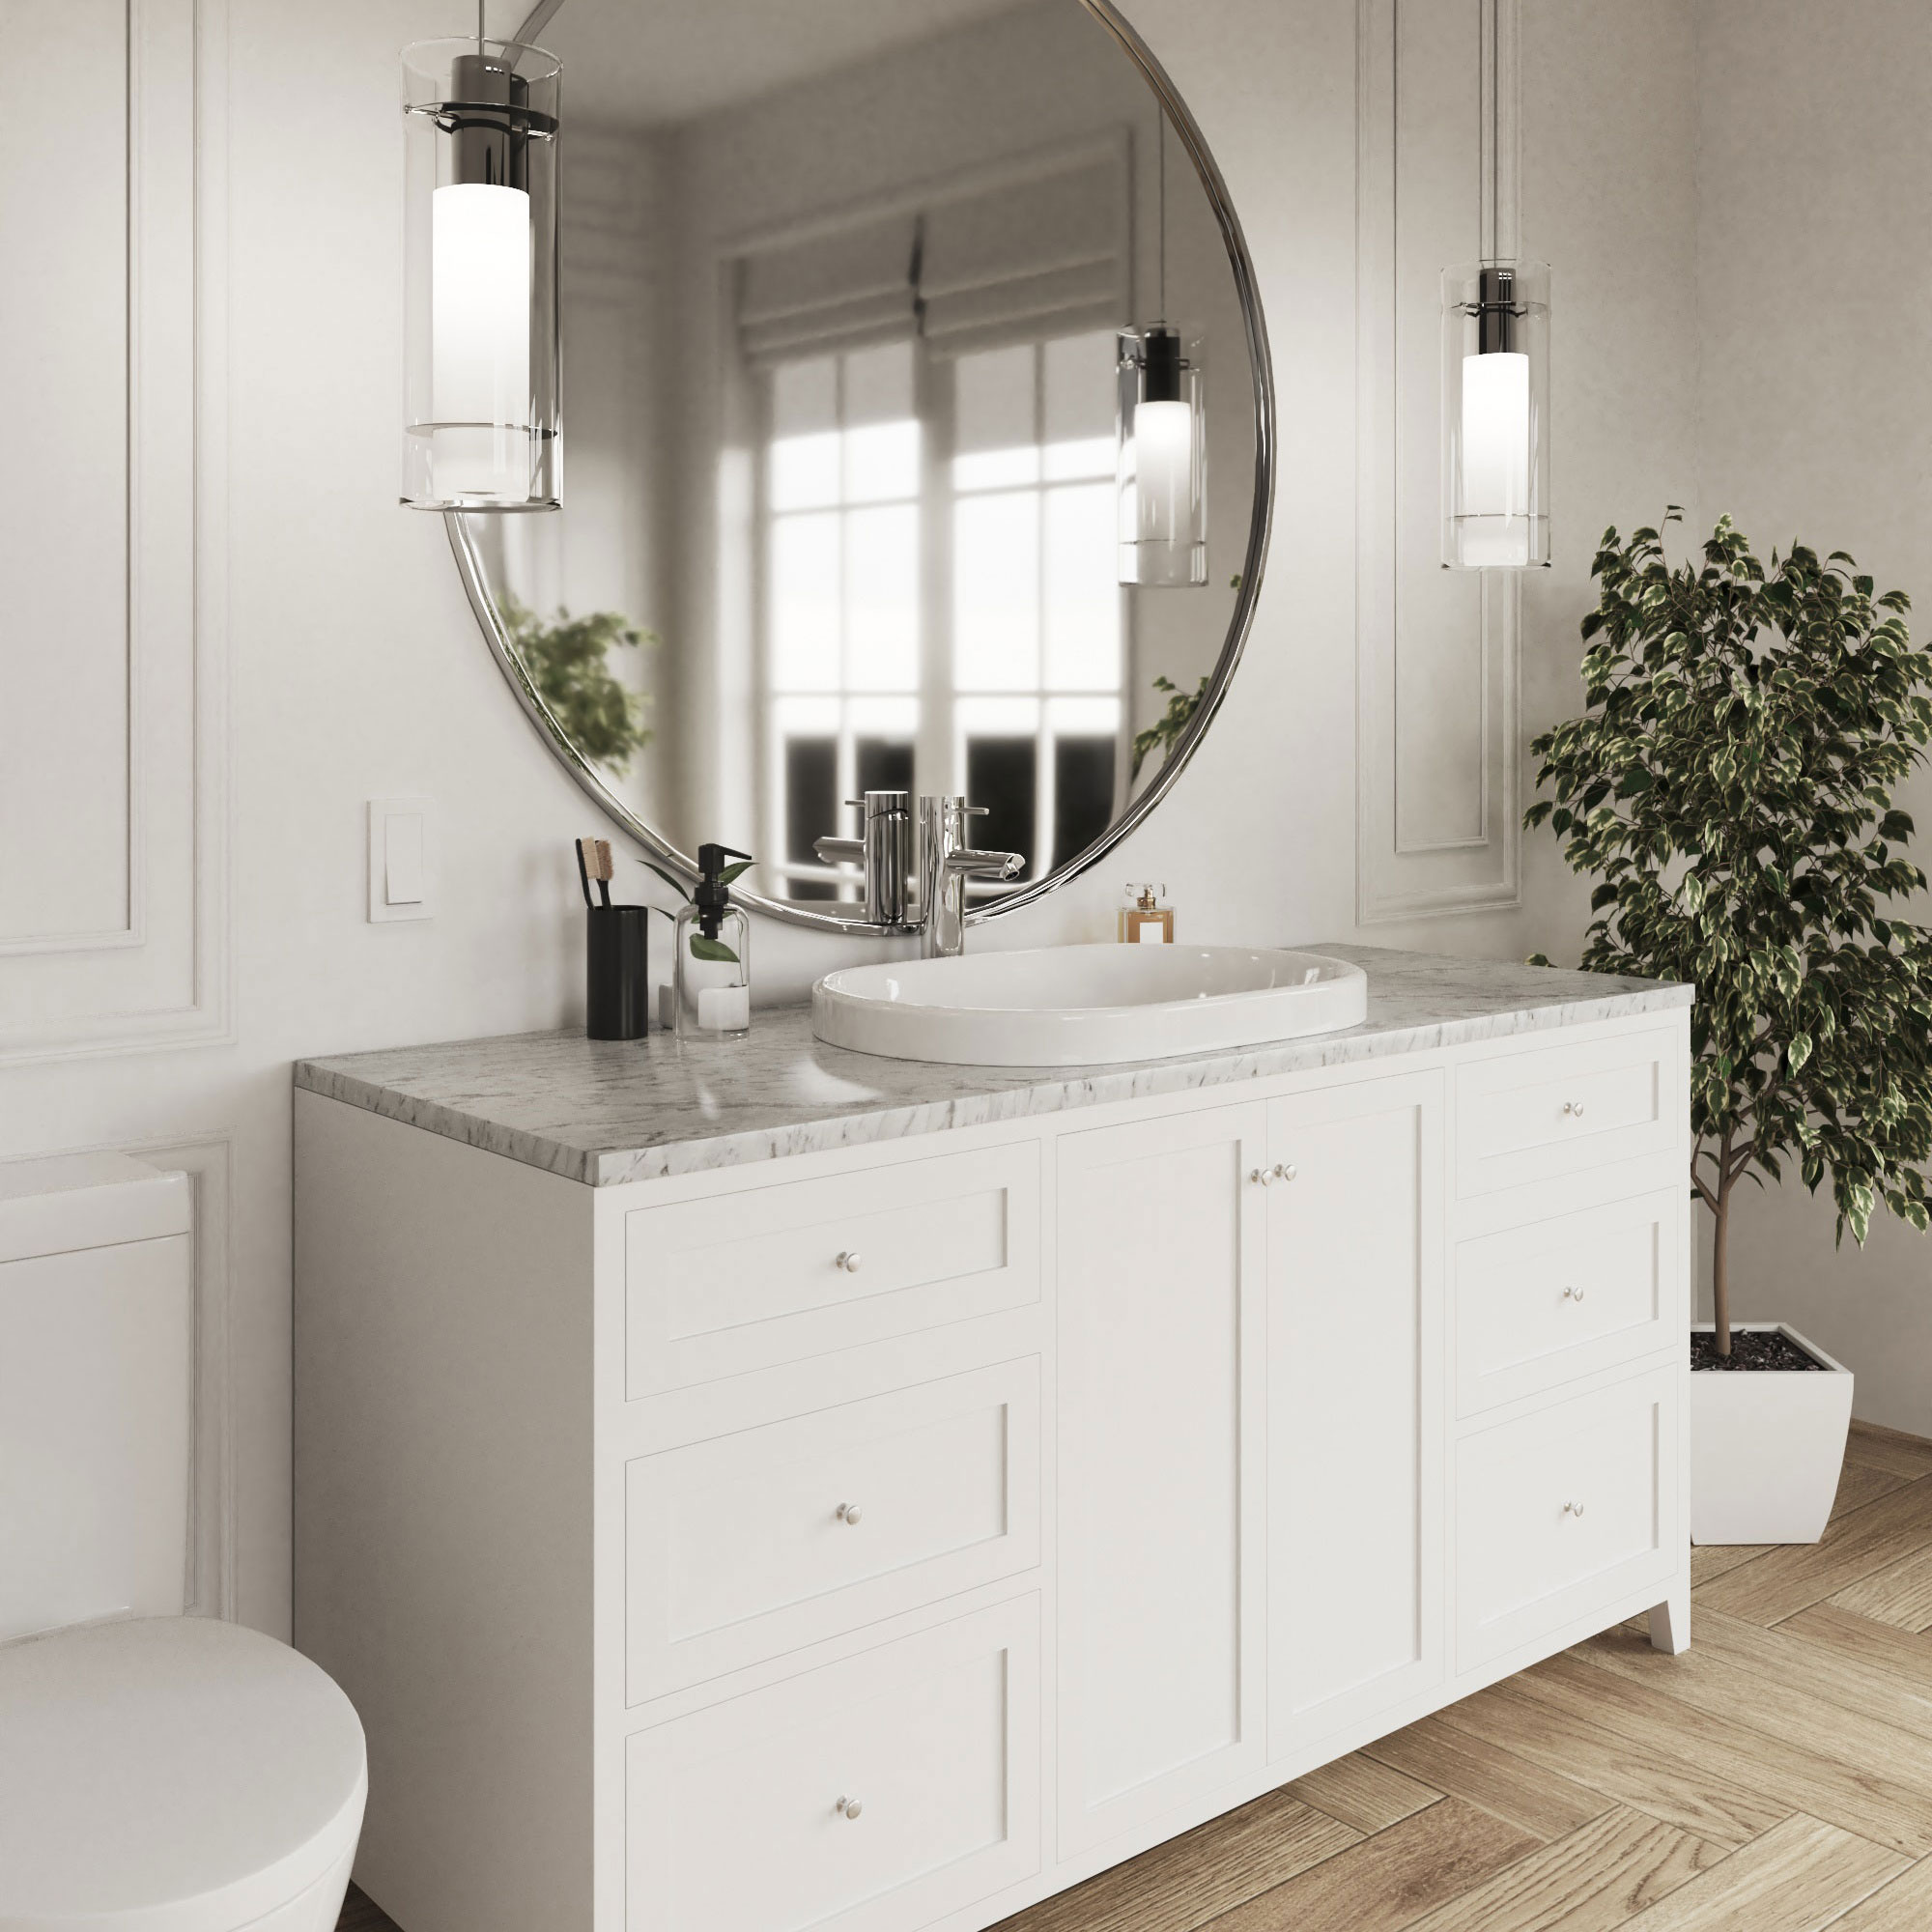 Bathroom Category Products Image